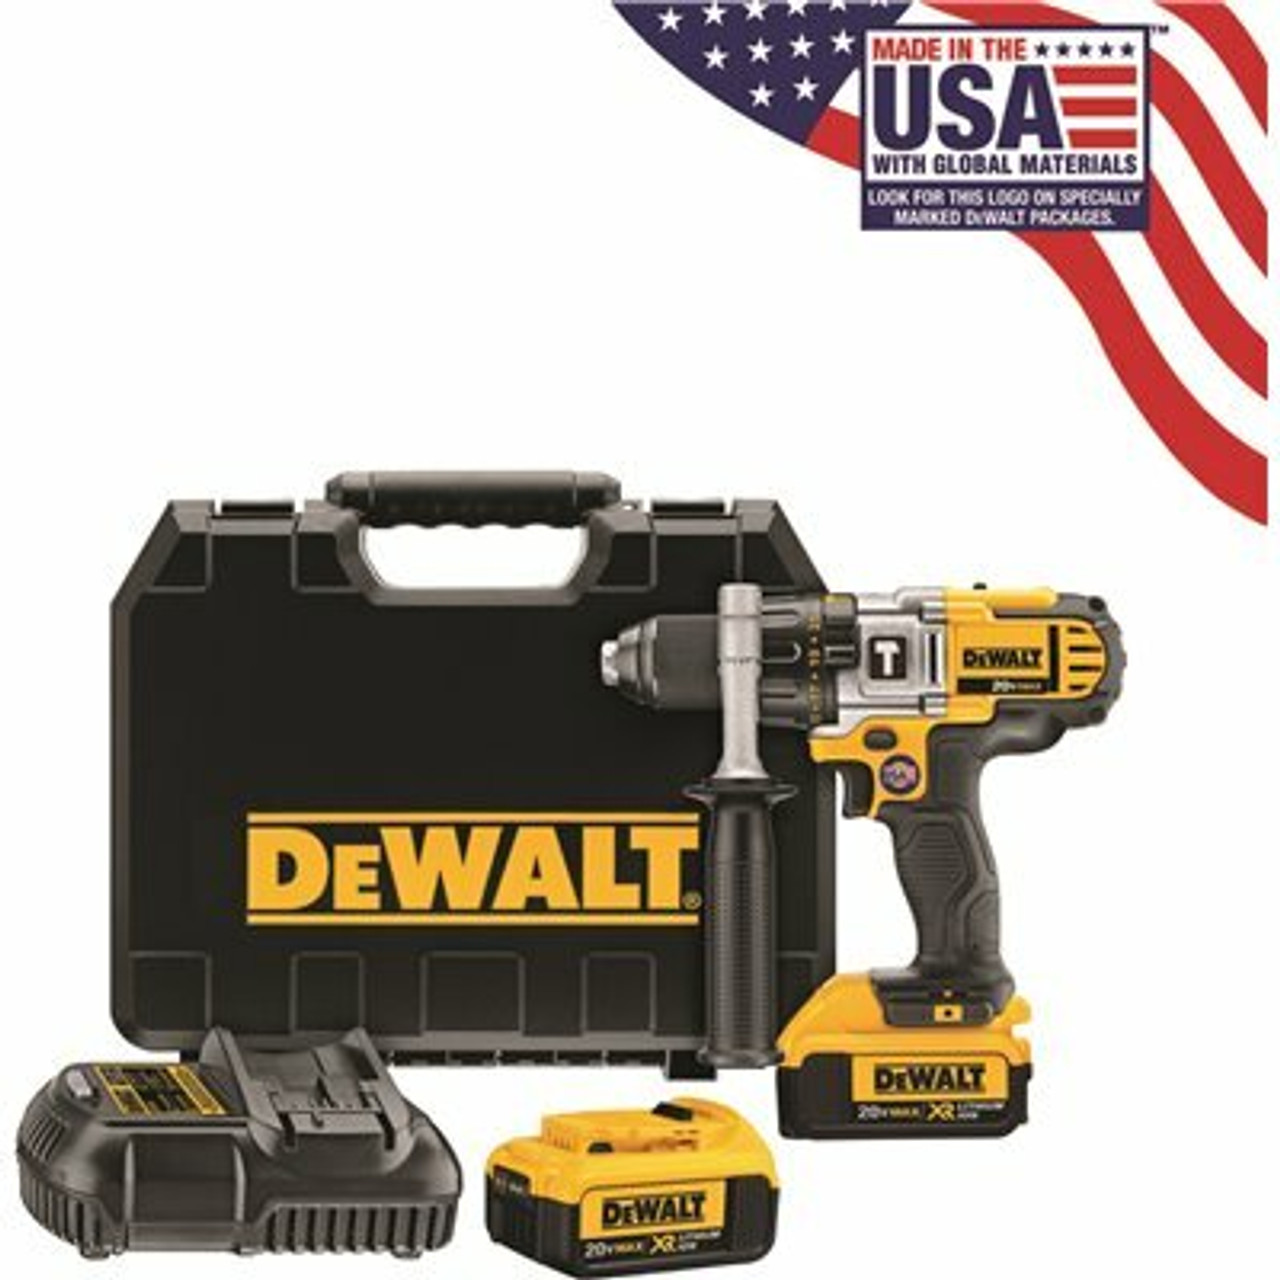 Dewalt 20-Volt Max Cordless Premium 3-Speed 1/2 In. Hammer Drill With Two 20-Volt 4.0Ah Batteries, Charger And Case